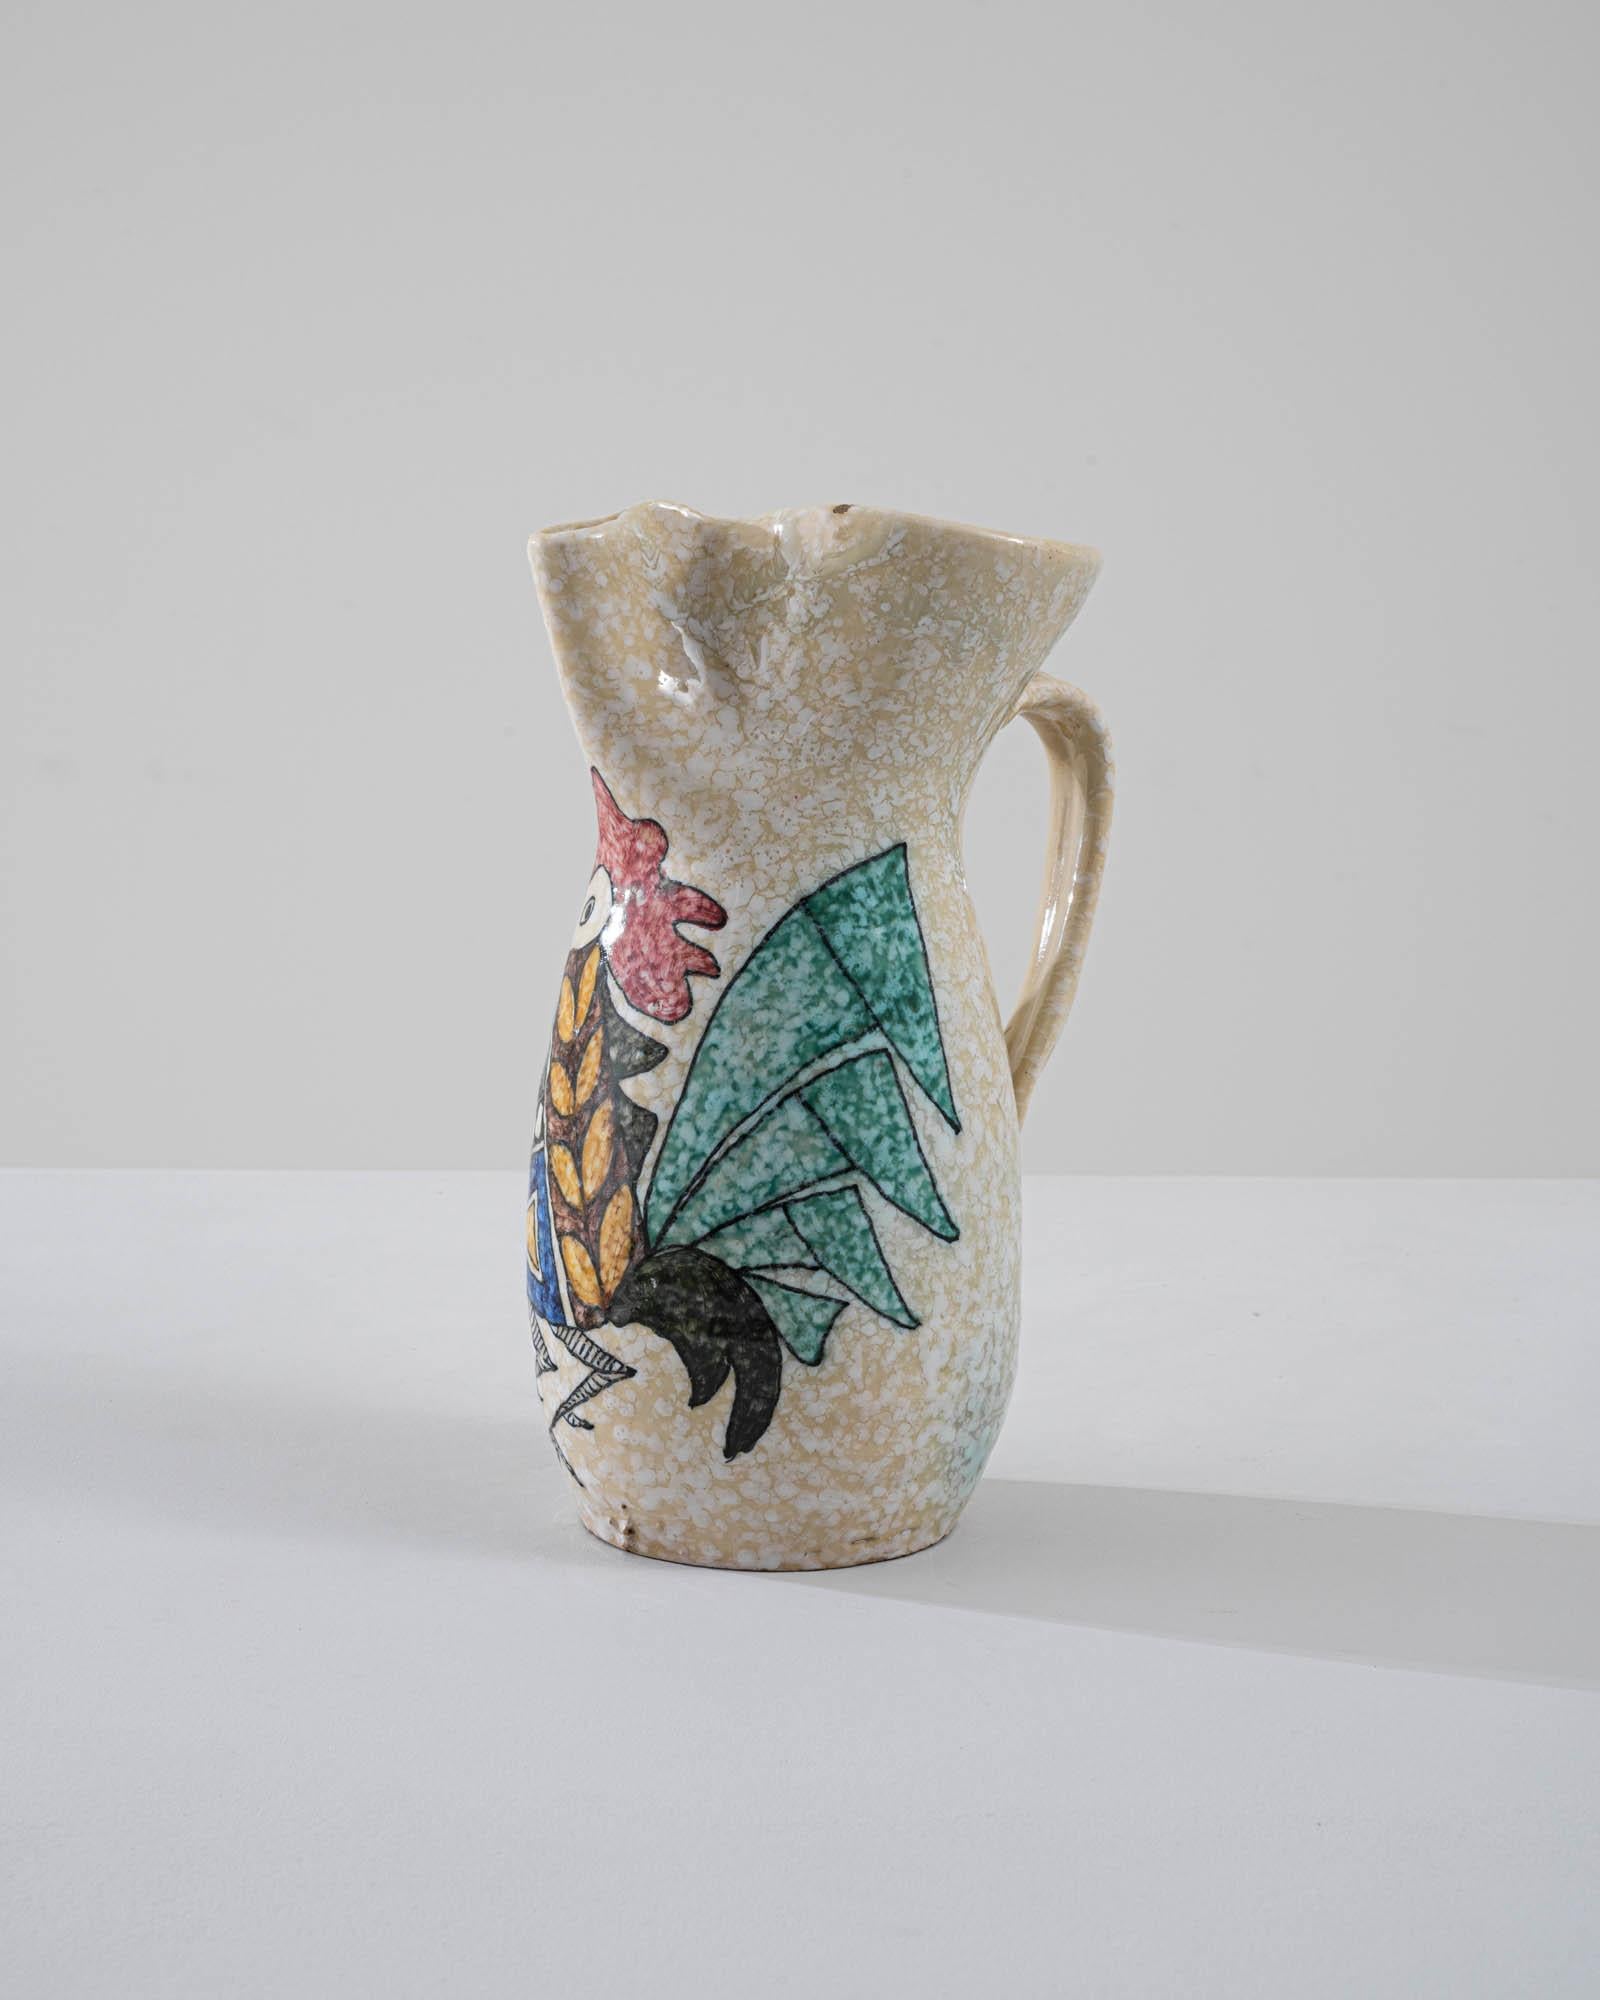 Playful, idiosyncratic and unique, this vintage pottery jug was produced in the atelier of Pabo Sanguino, an artist known equally for his Modernist paintings and his ceramic work. Made in the 20th century, the jug showcases two of Sanguino’s most